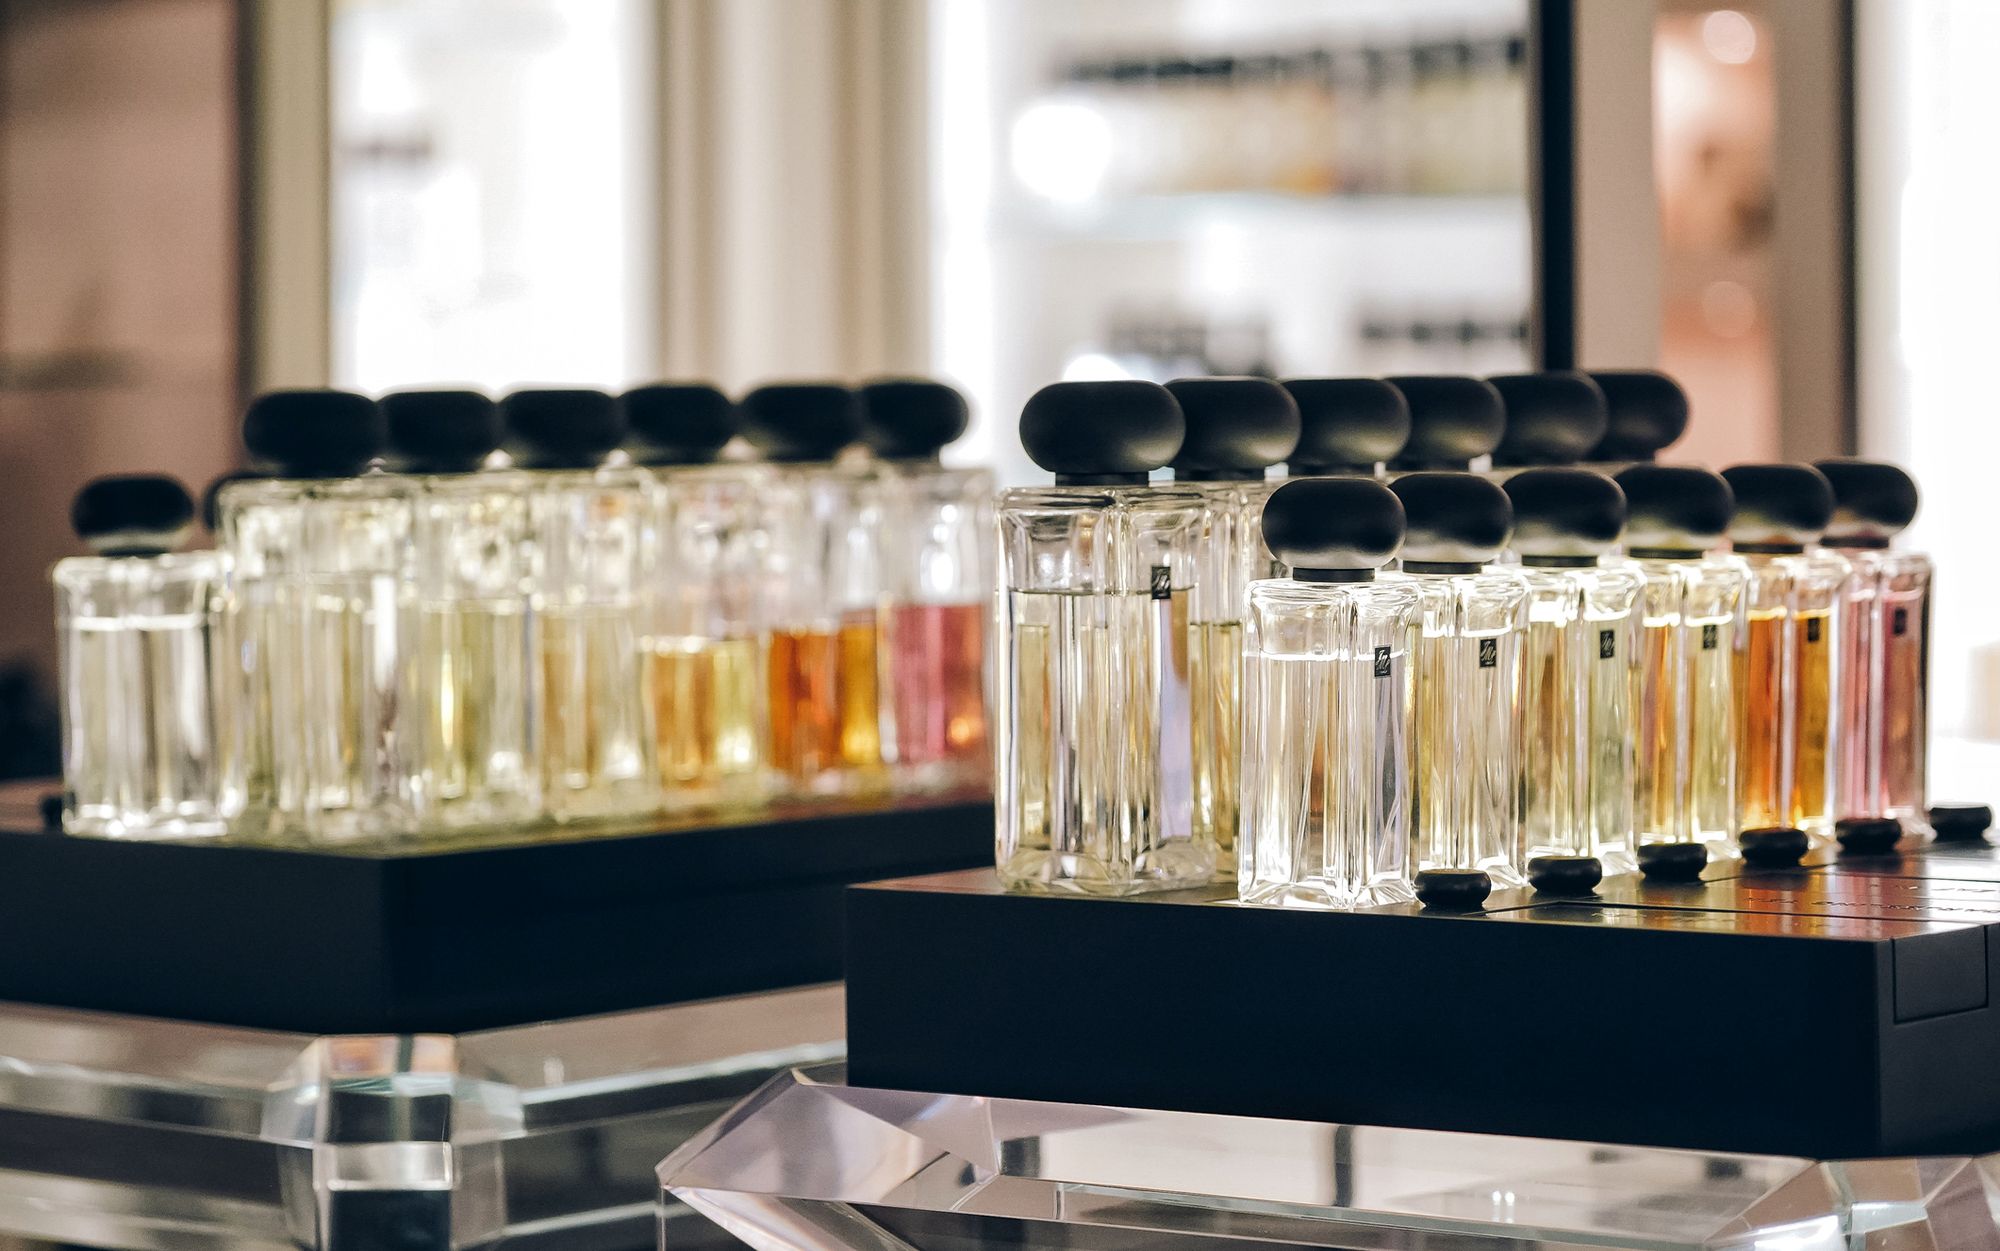 Post-pandemic playbook: The luxury fragrance rebound